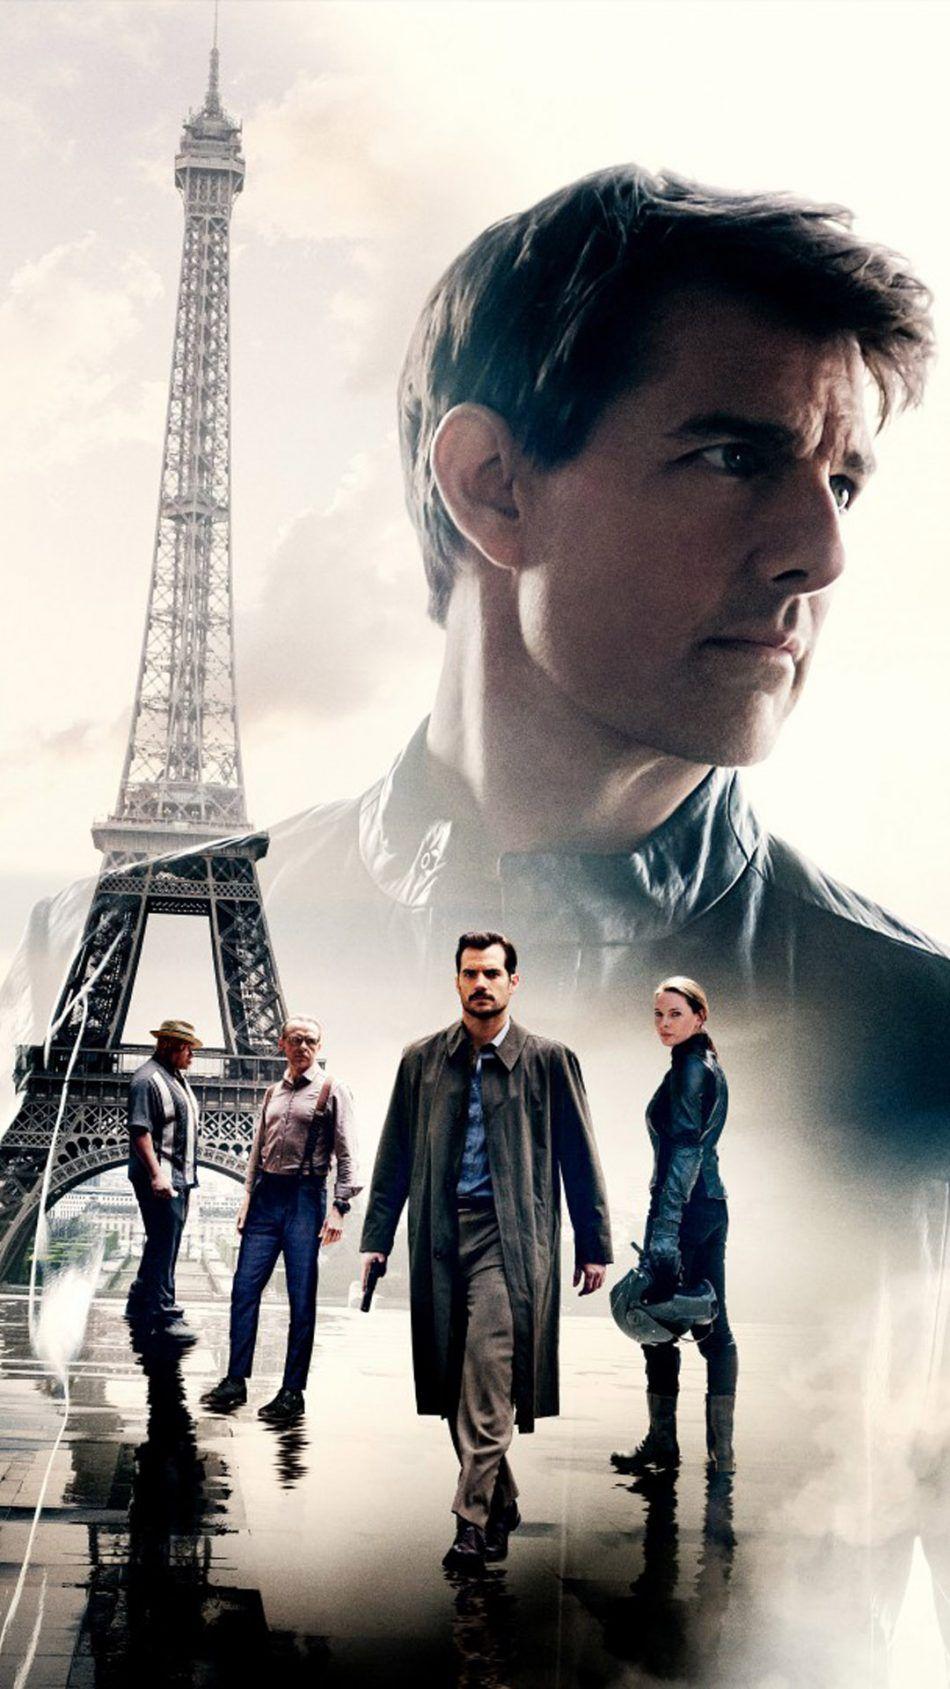 Mission Impossible Fallout Tom Cruise 2018 Free 100% Pure